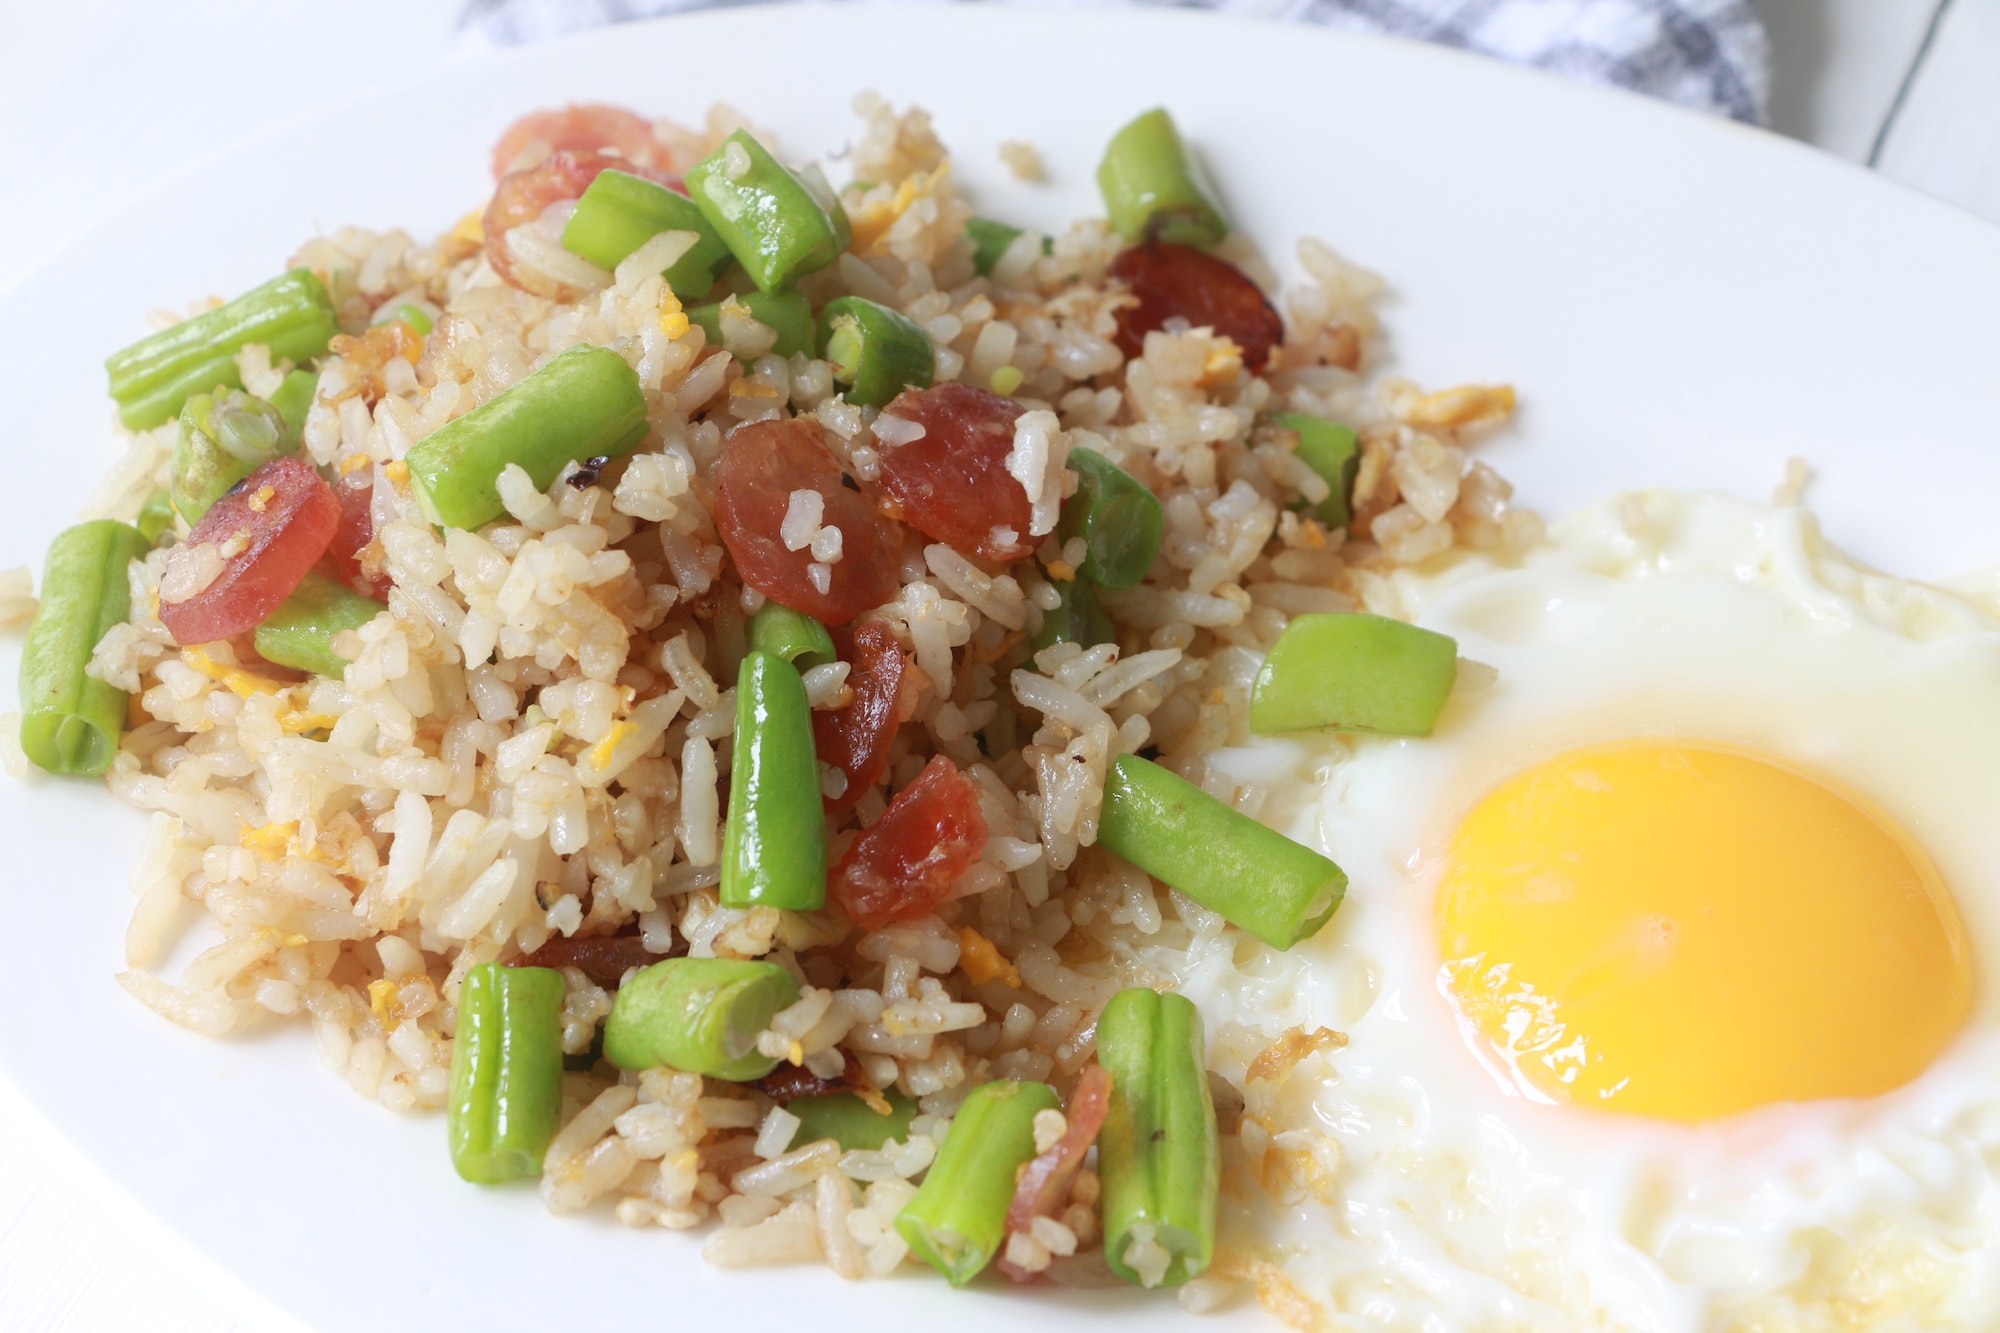 Fried rice with Chinese sausage, green bean and fried egg